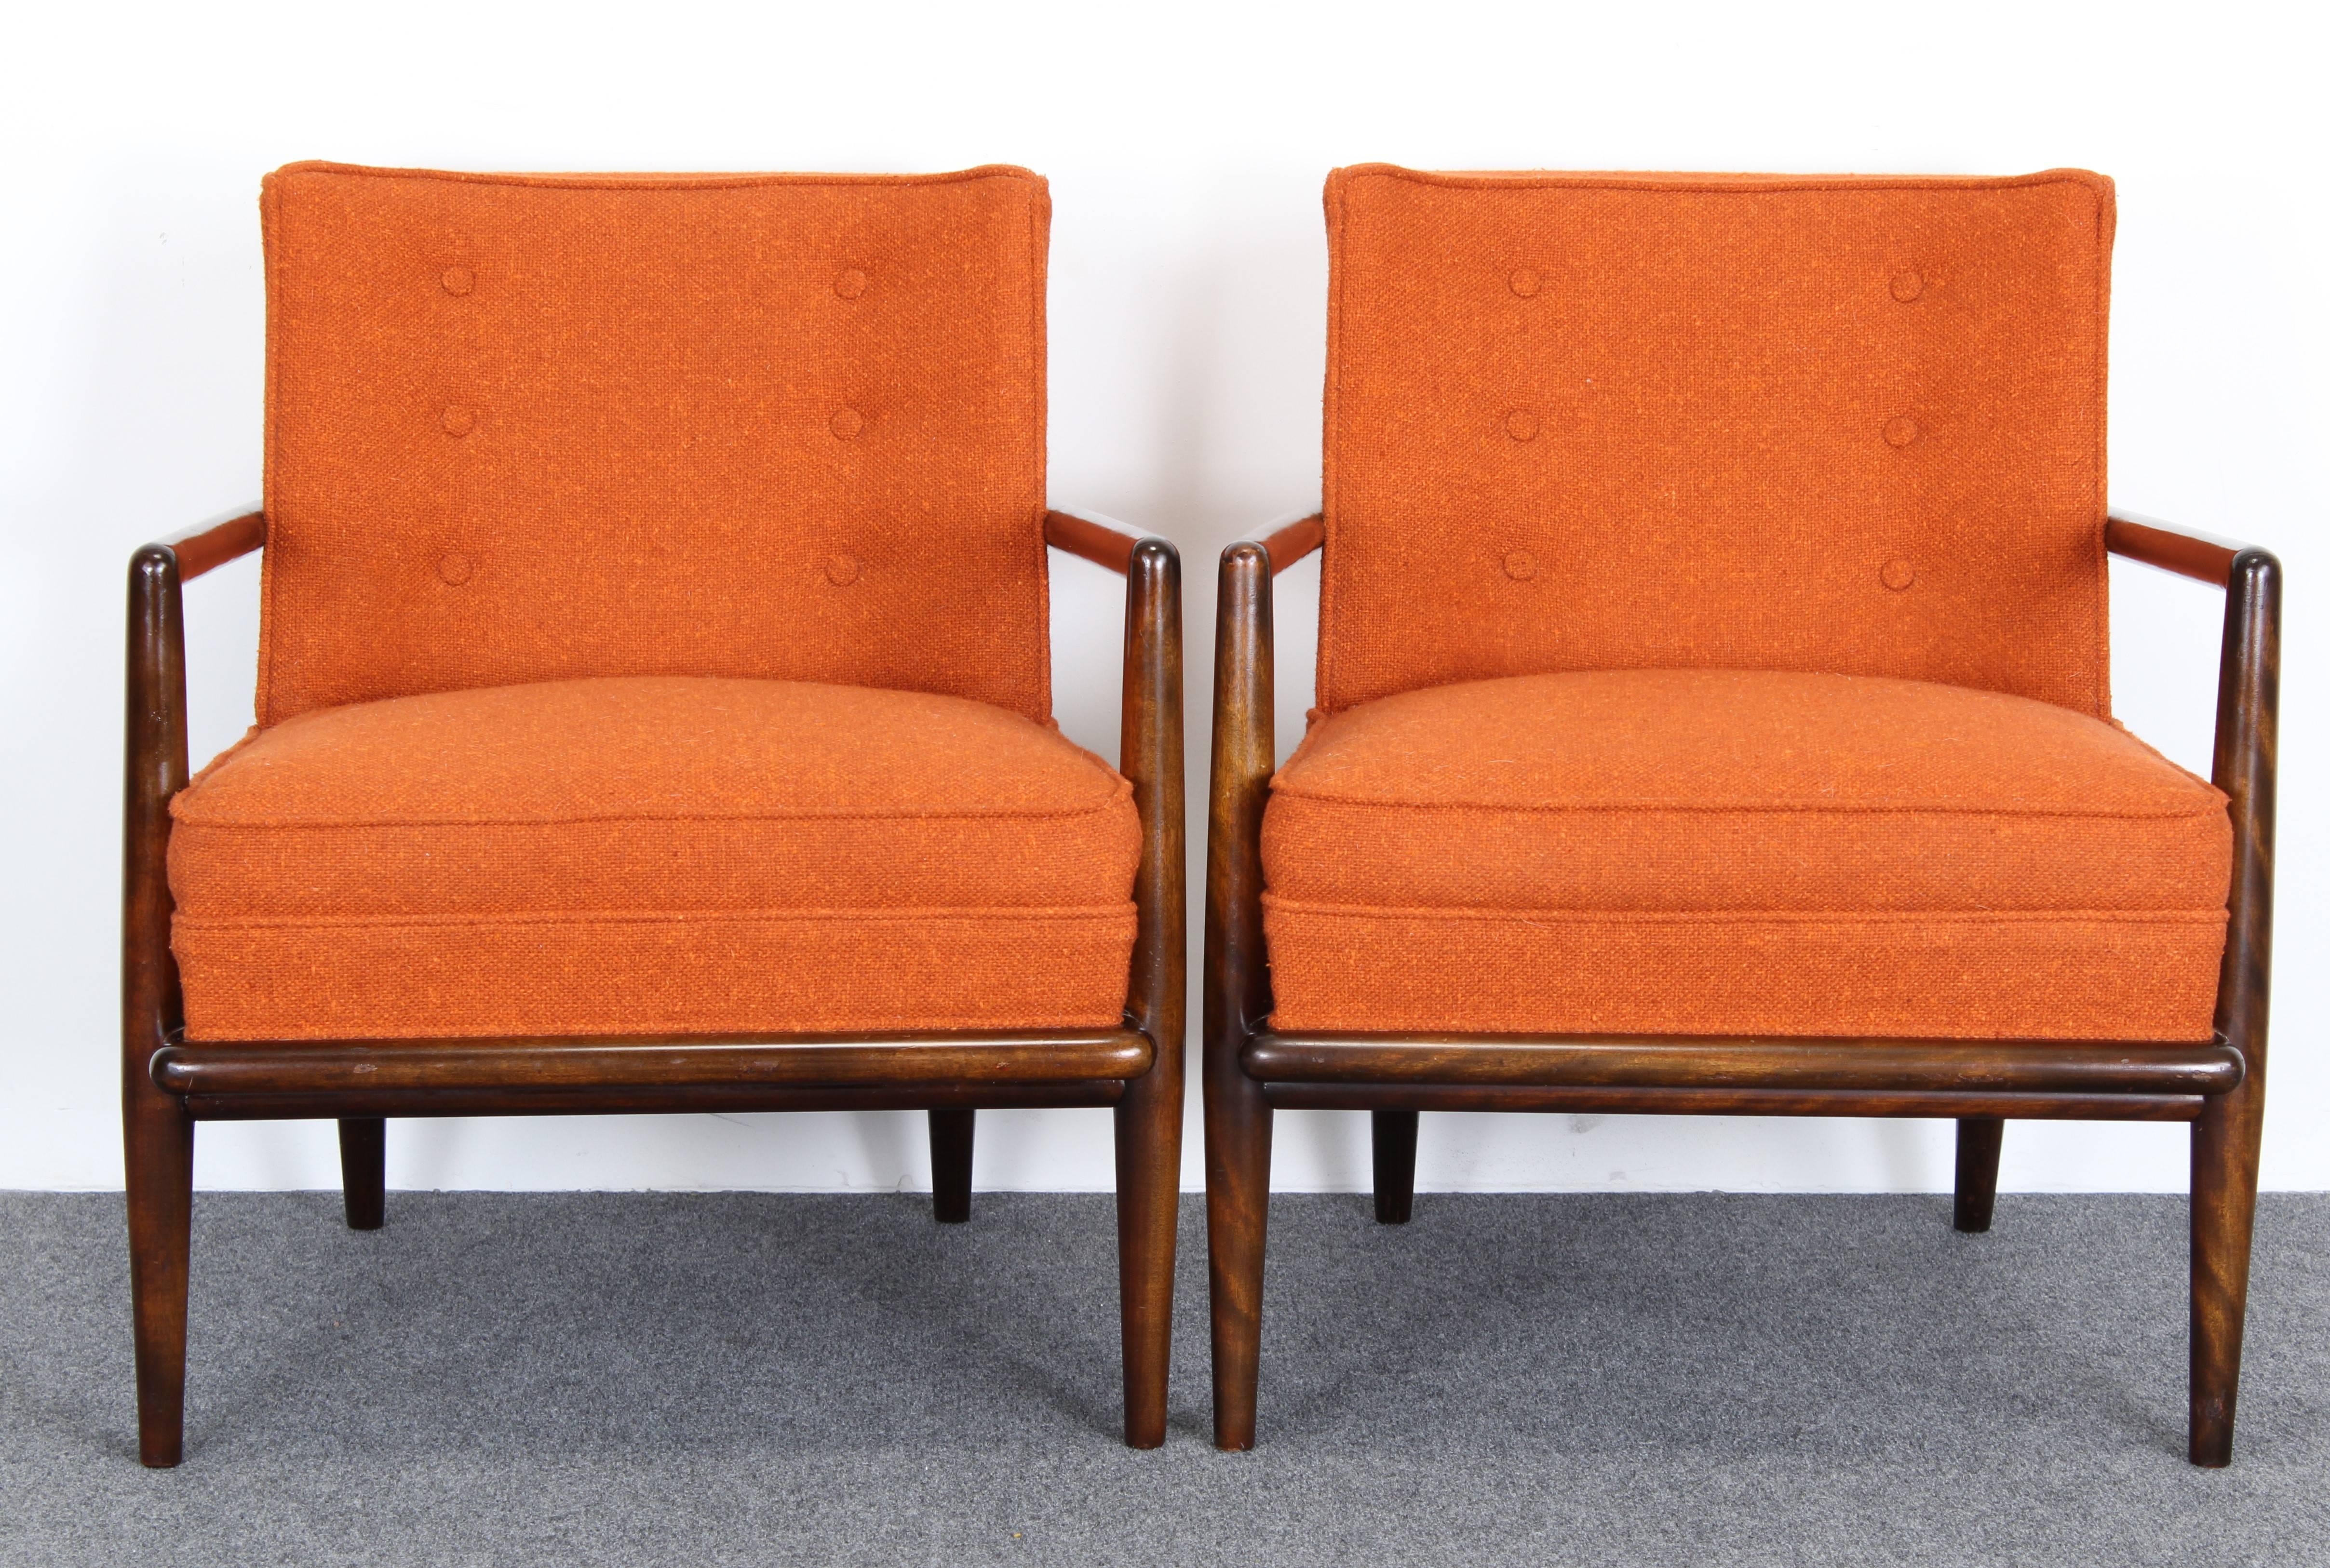 Mid-Century Modern Pair of Lounge Chairs Model No. 1721 by T.H. Robsjohn-Gibbings, 1950s